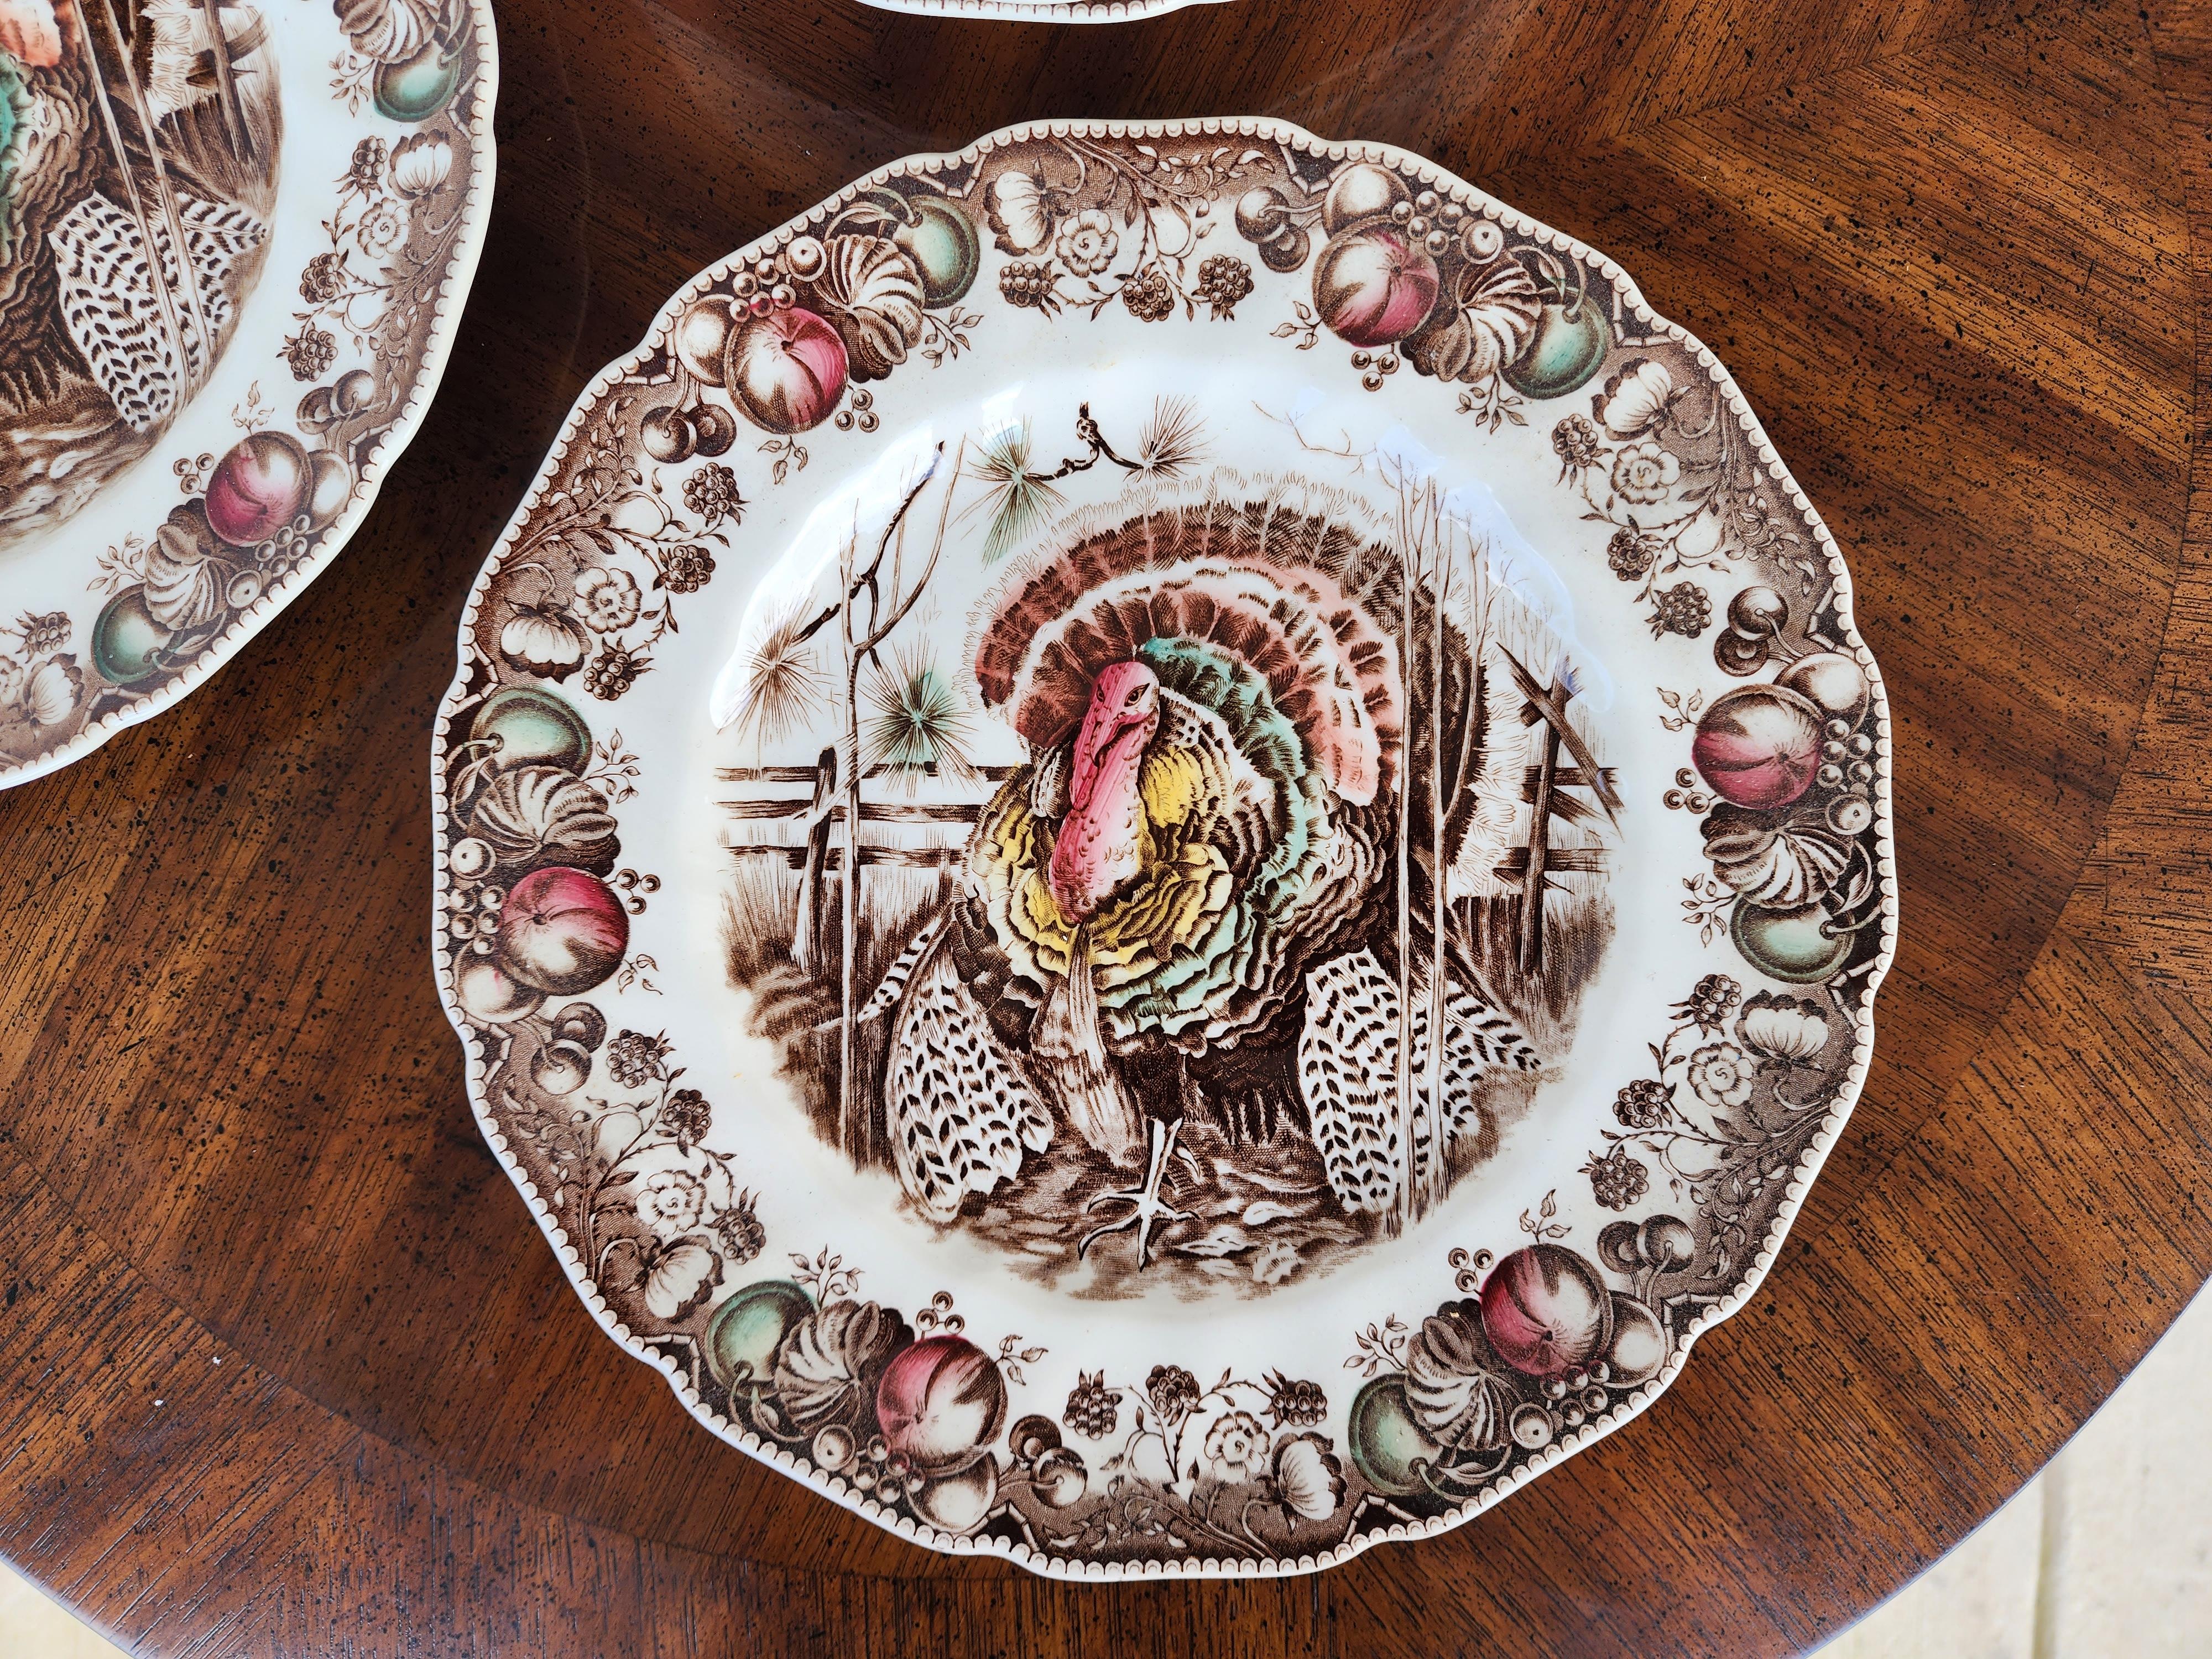 For FULL item description click on CONTINUE READING at the bottom of this page.
Offering One Of Our Recent Palm Beach Estate Fine Dinnerware Acquisitions Of A
Rare Set of 14 Johnson Bros His Majesty Turkey Dinner Plates 10 3/4